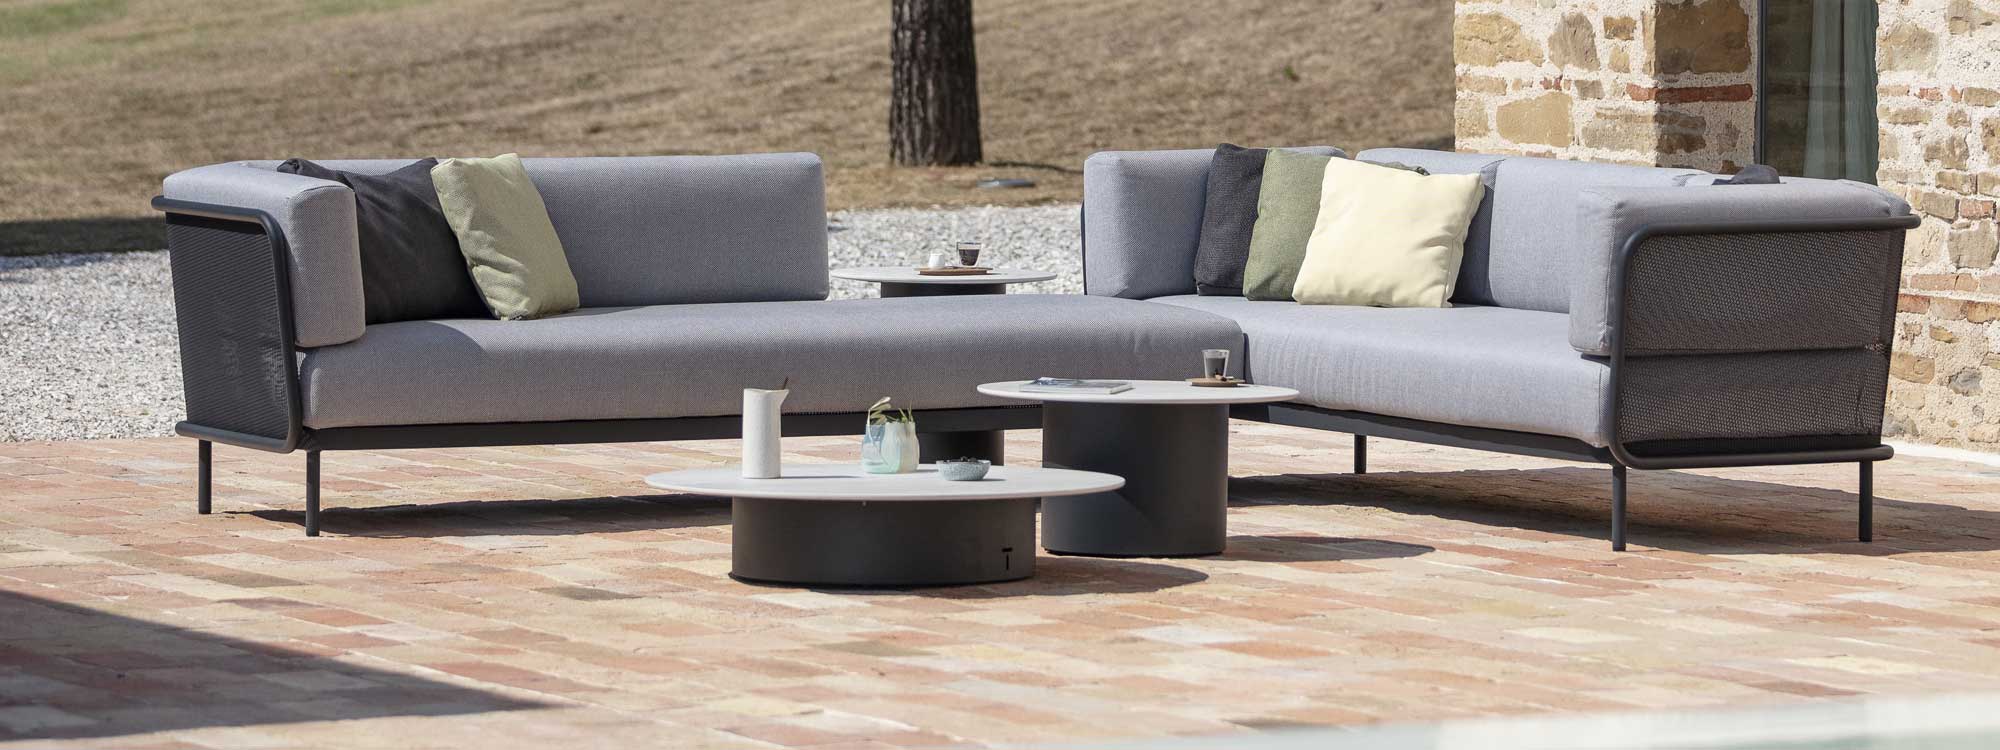 Image showing 3 different heights of Branta outdoor side tables and low tables next to Baza modern garden corner sofa by Todus